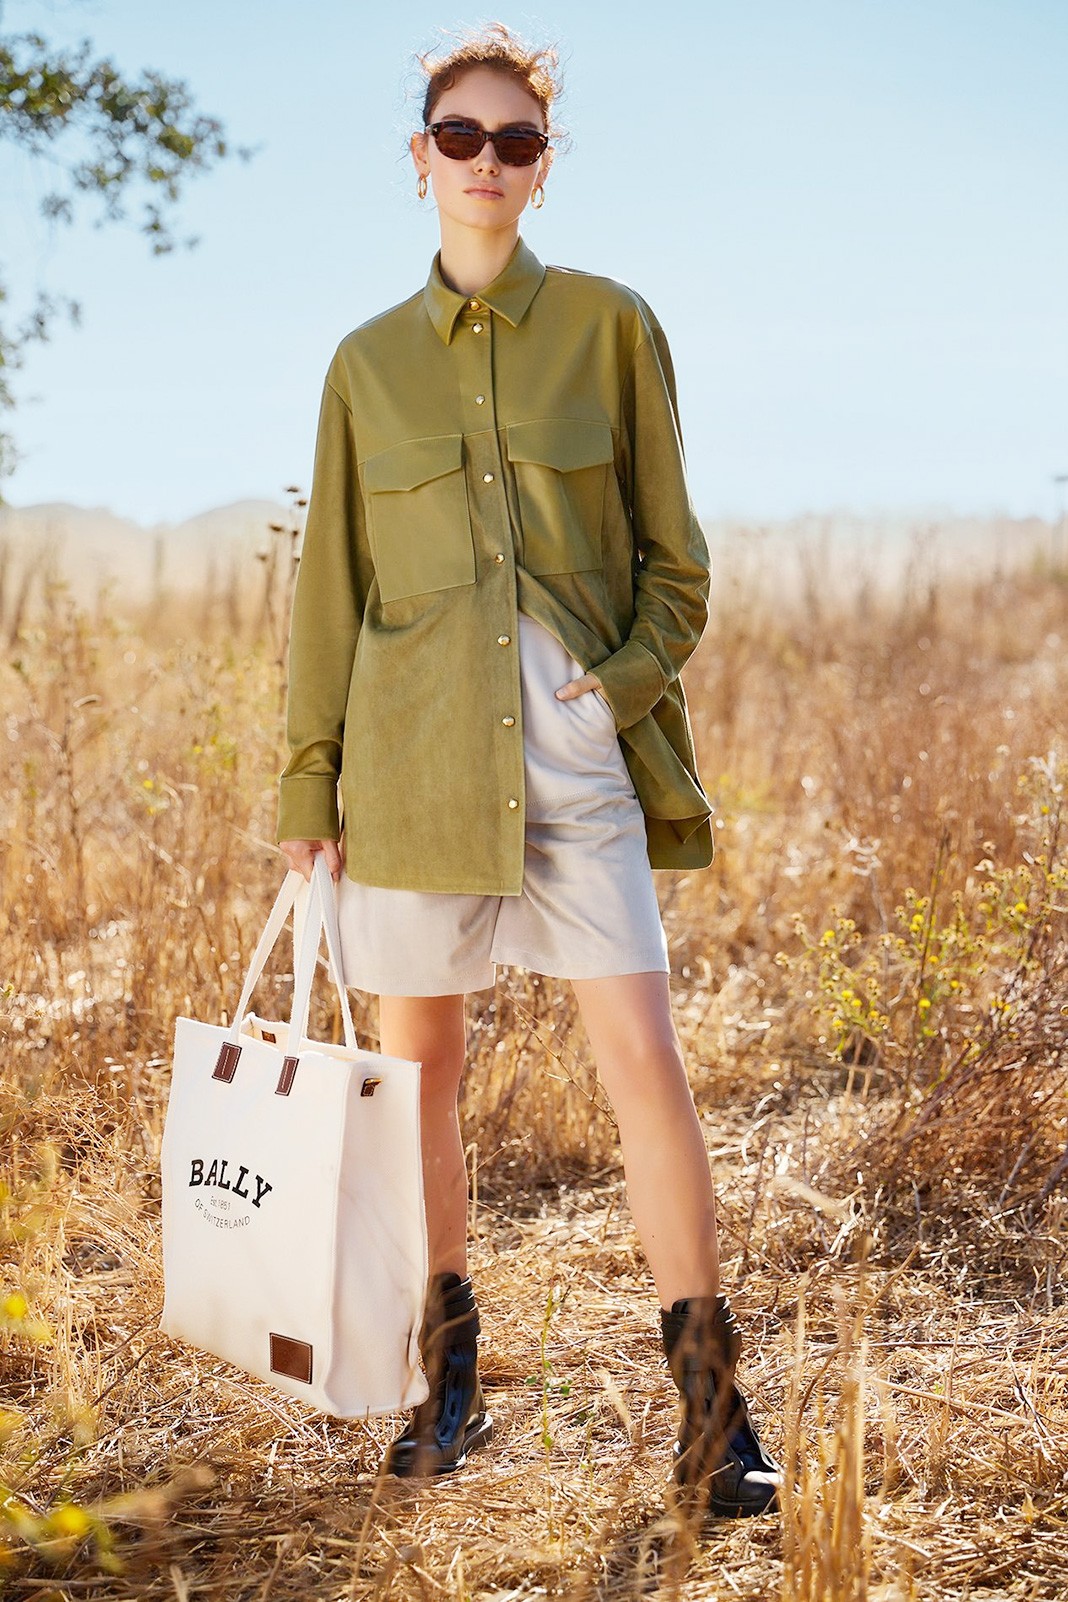 Bally Spring/Summer 2021 Ready-to-Wear Collection